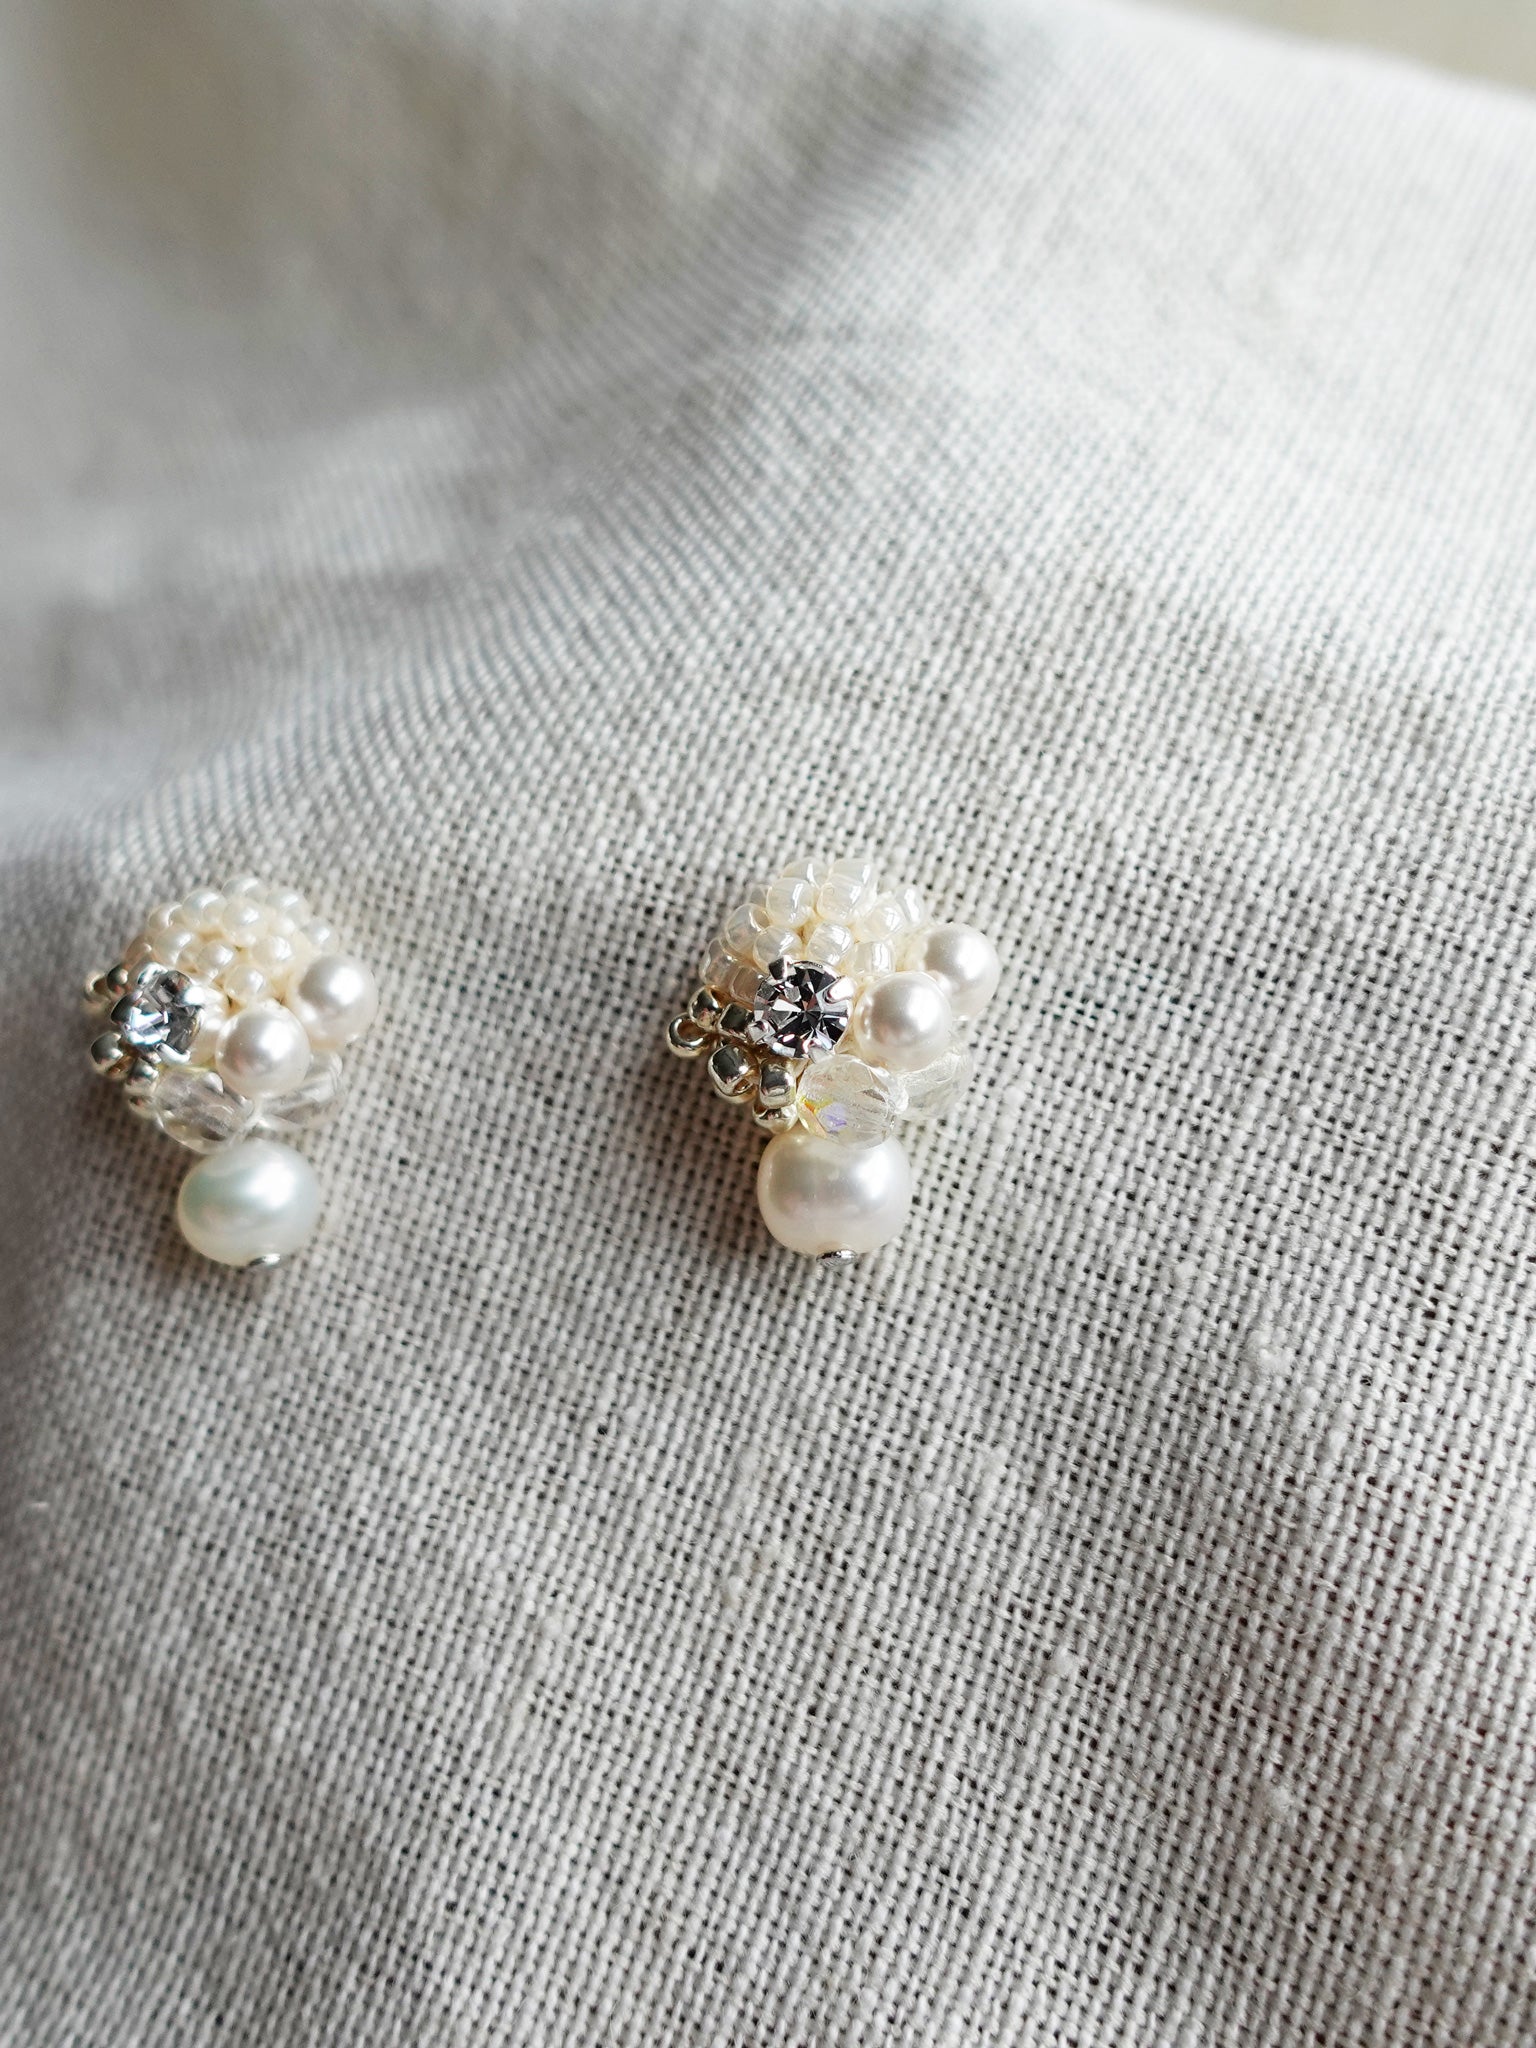 Polaris Phoebe Earrings in Ivory Right Close